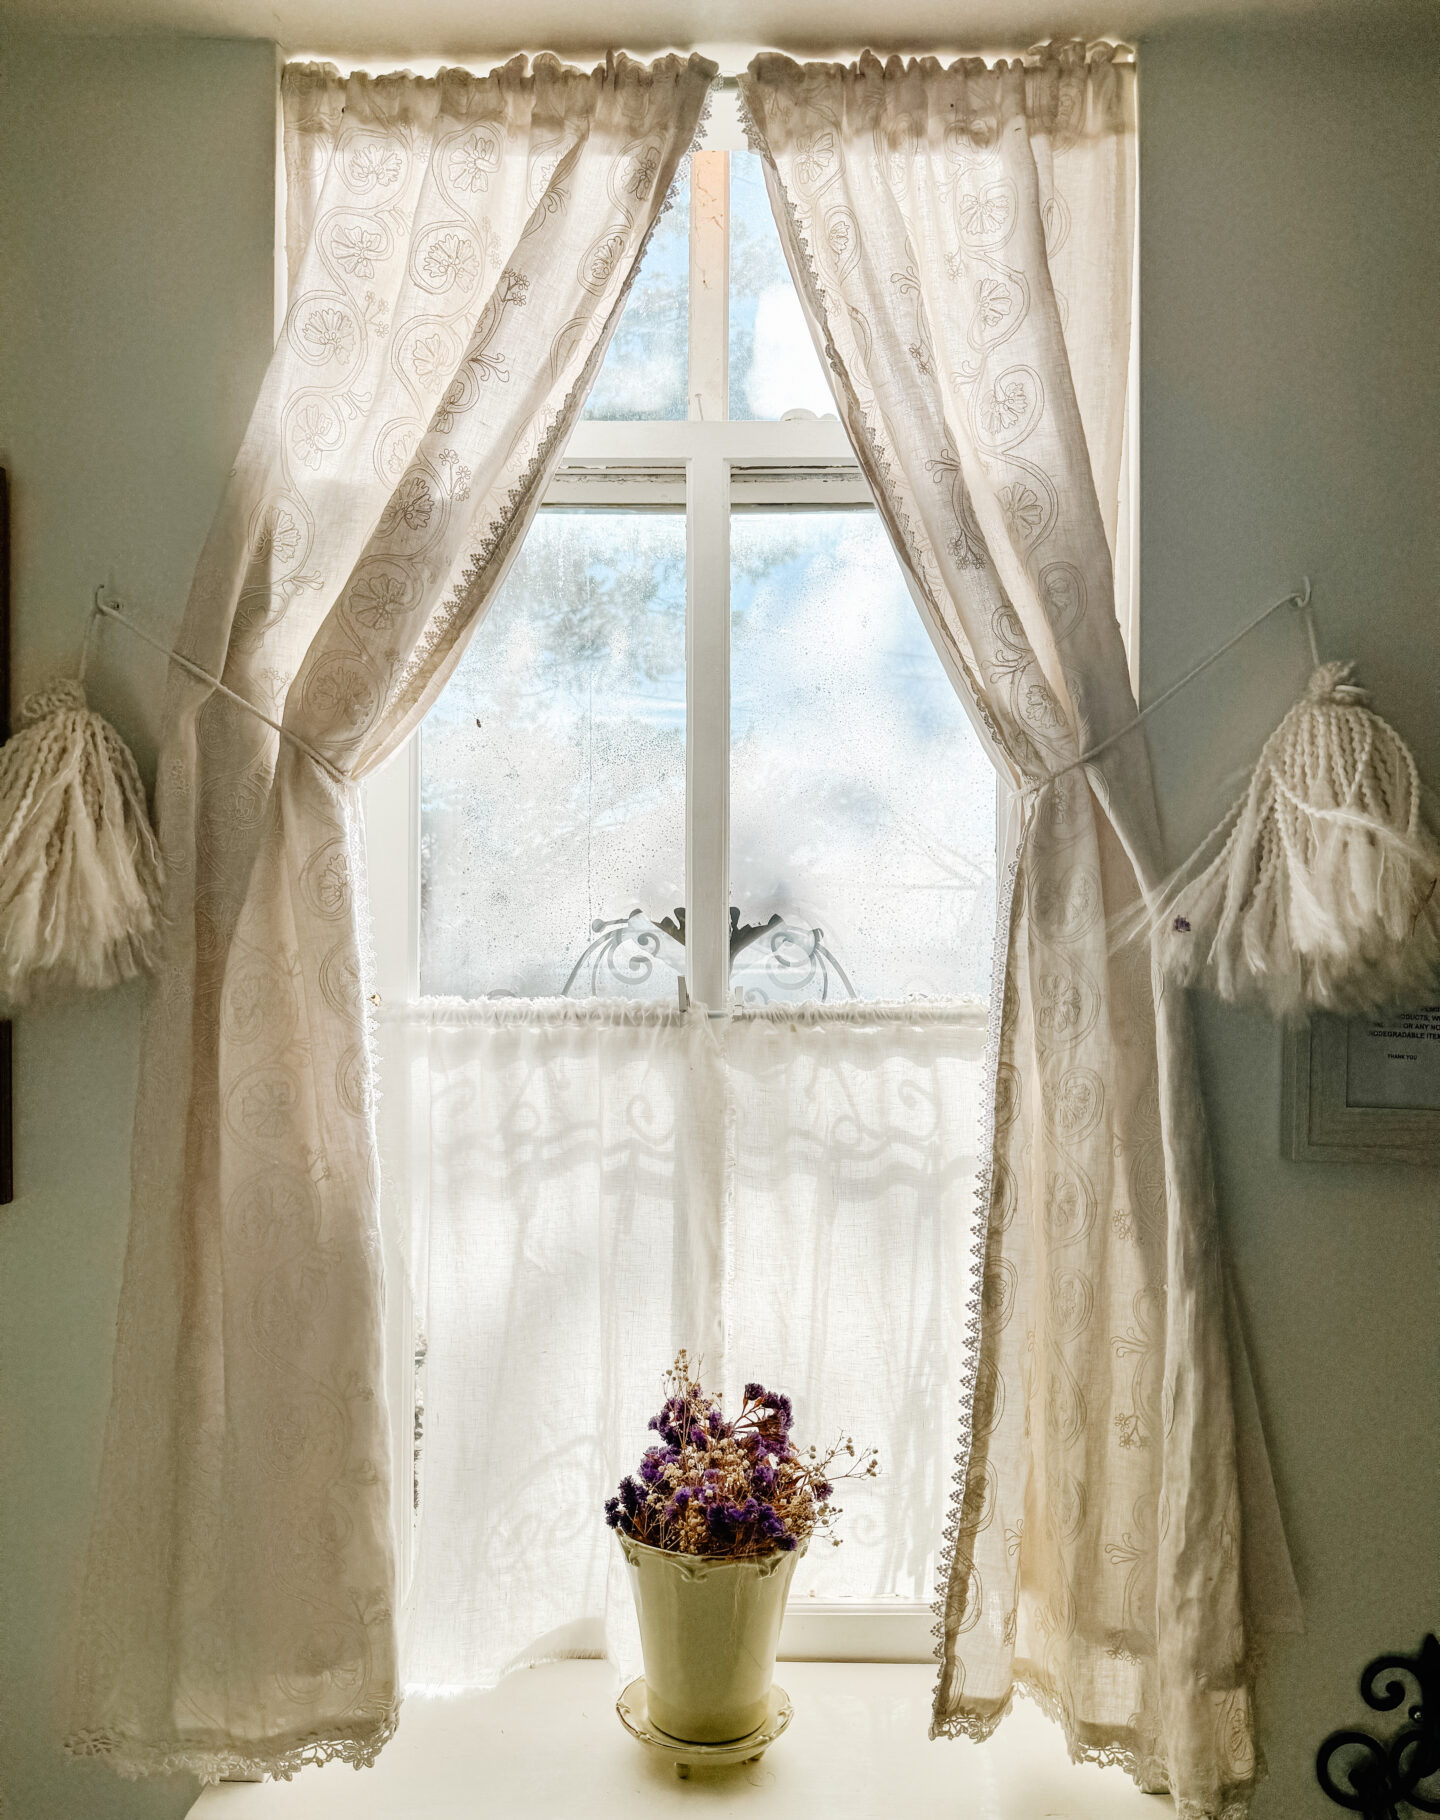 a view from an old window with delicate curtains